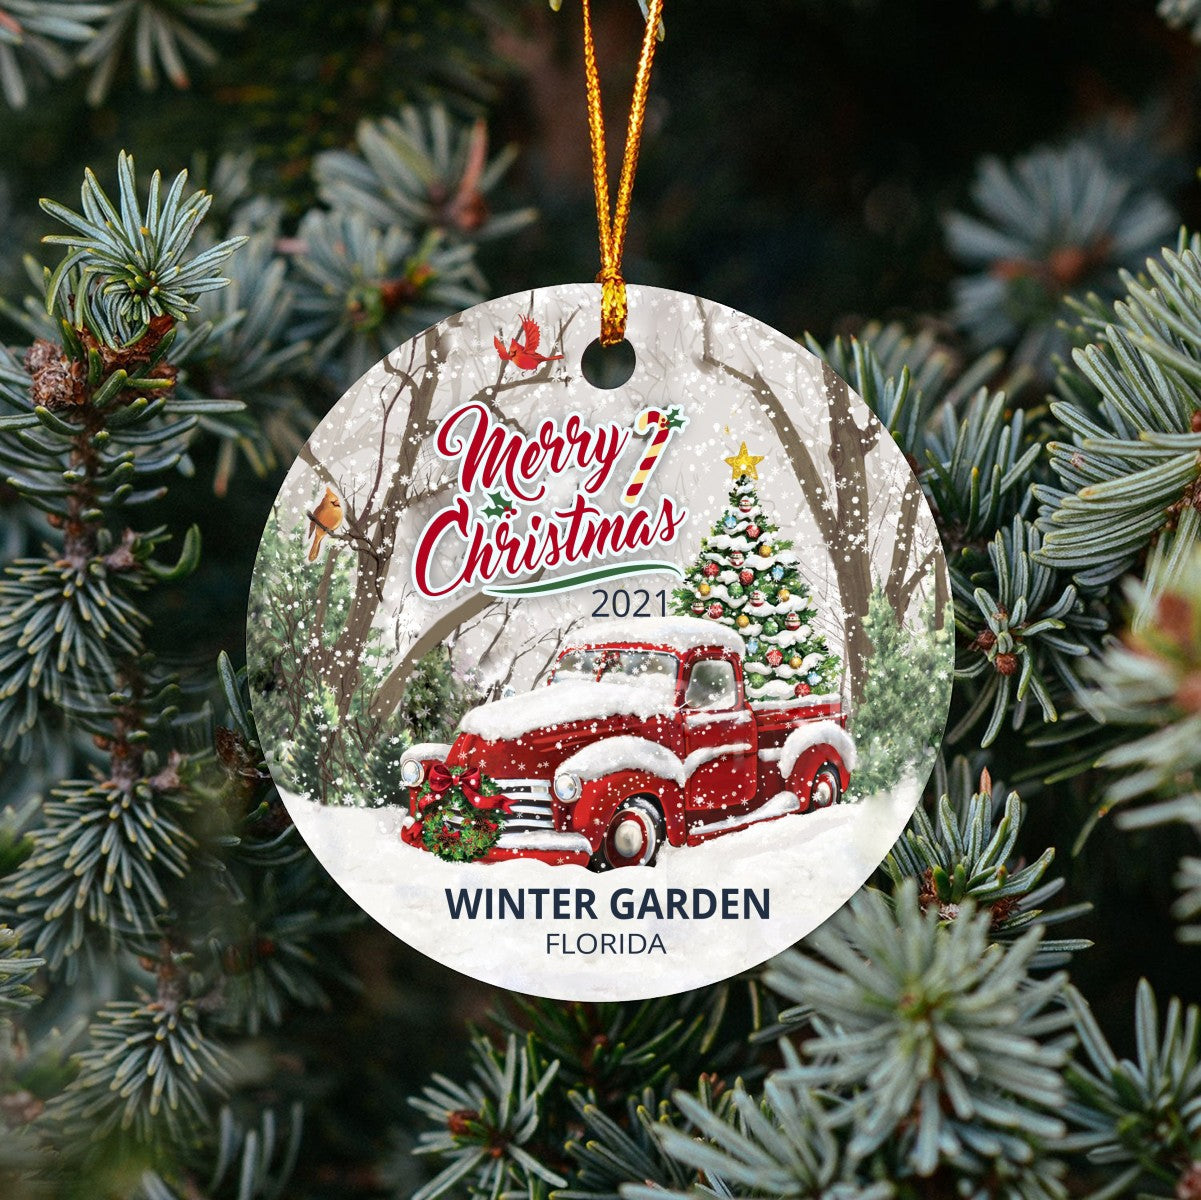 Christmas Tree Ornaments Winter Garden - Ornament Customize With Name City And State Winter Garden Florida FL - Red Truck Xmas Ornaments 3'' Plastic Gift For Family, Friend And Housewarming